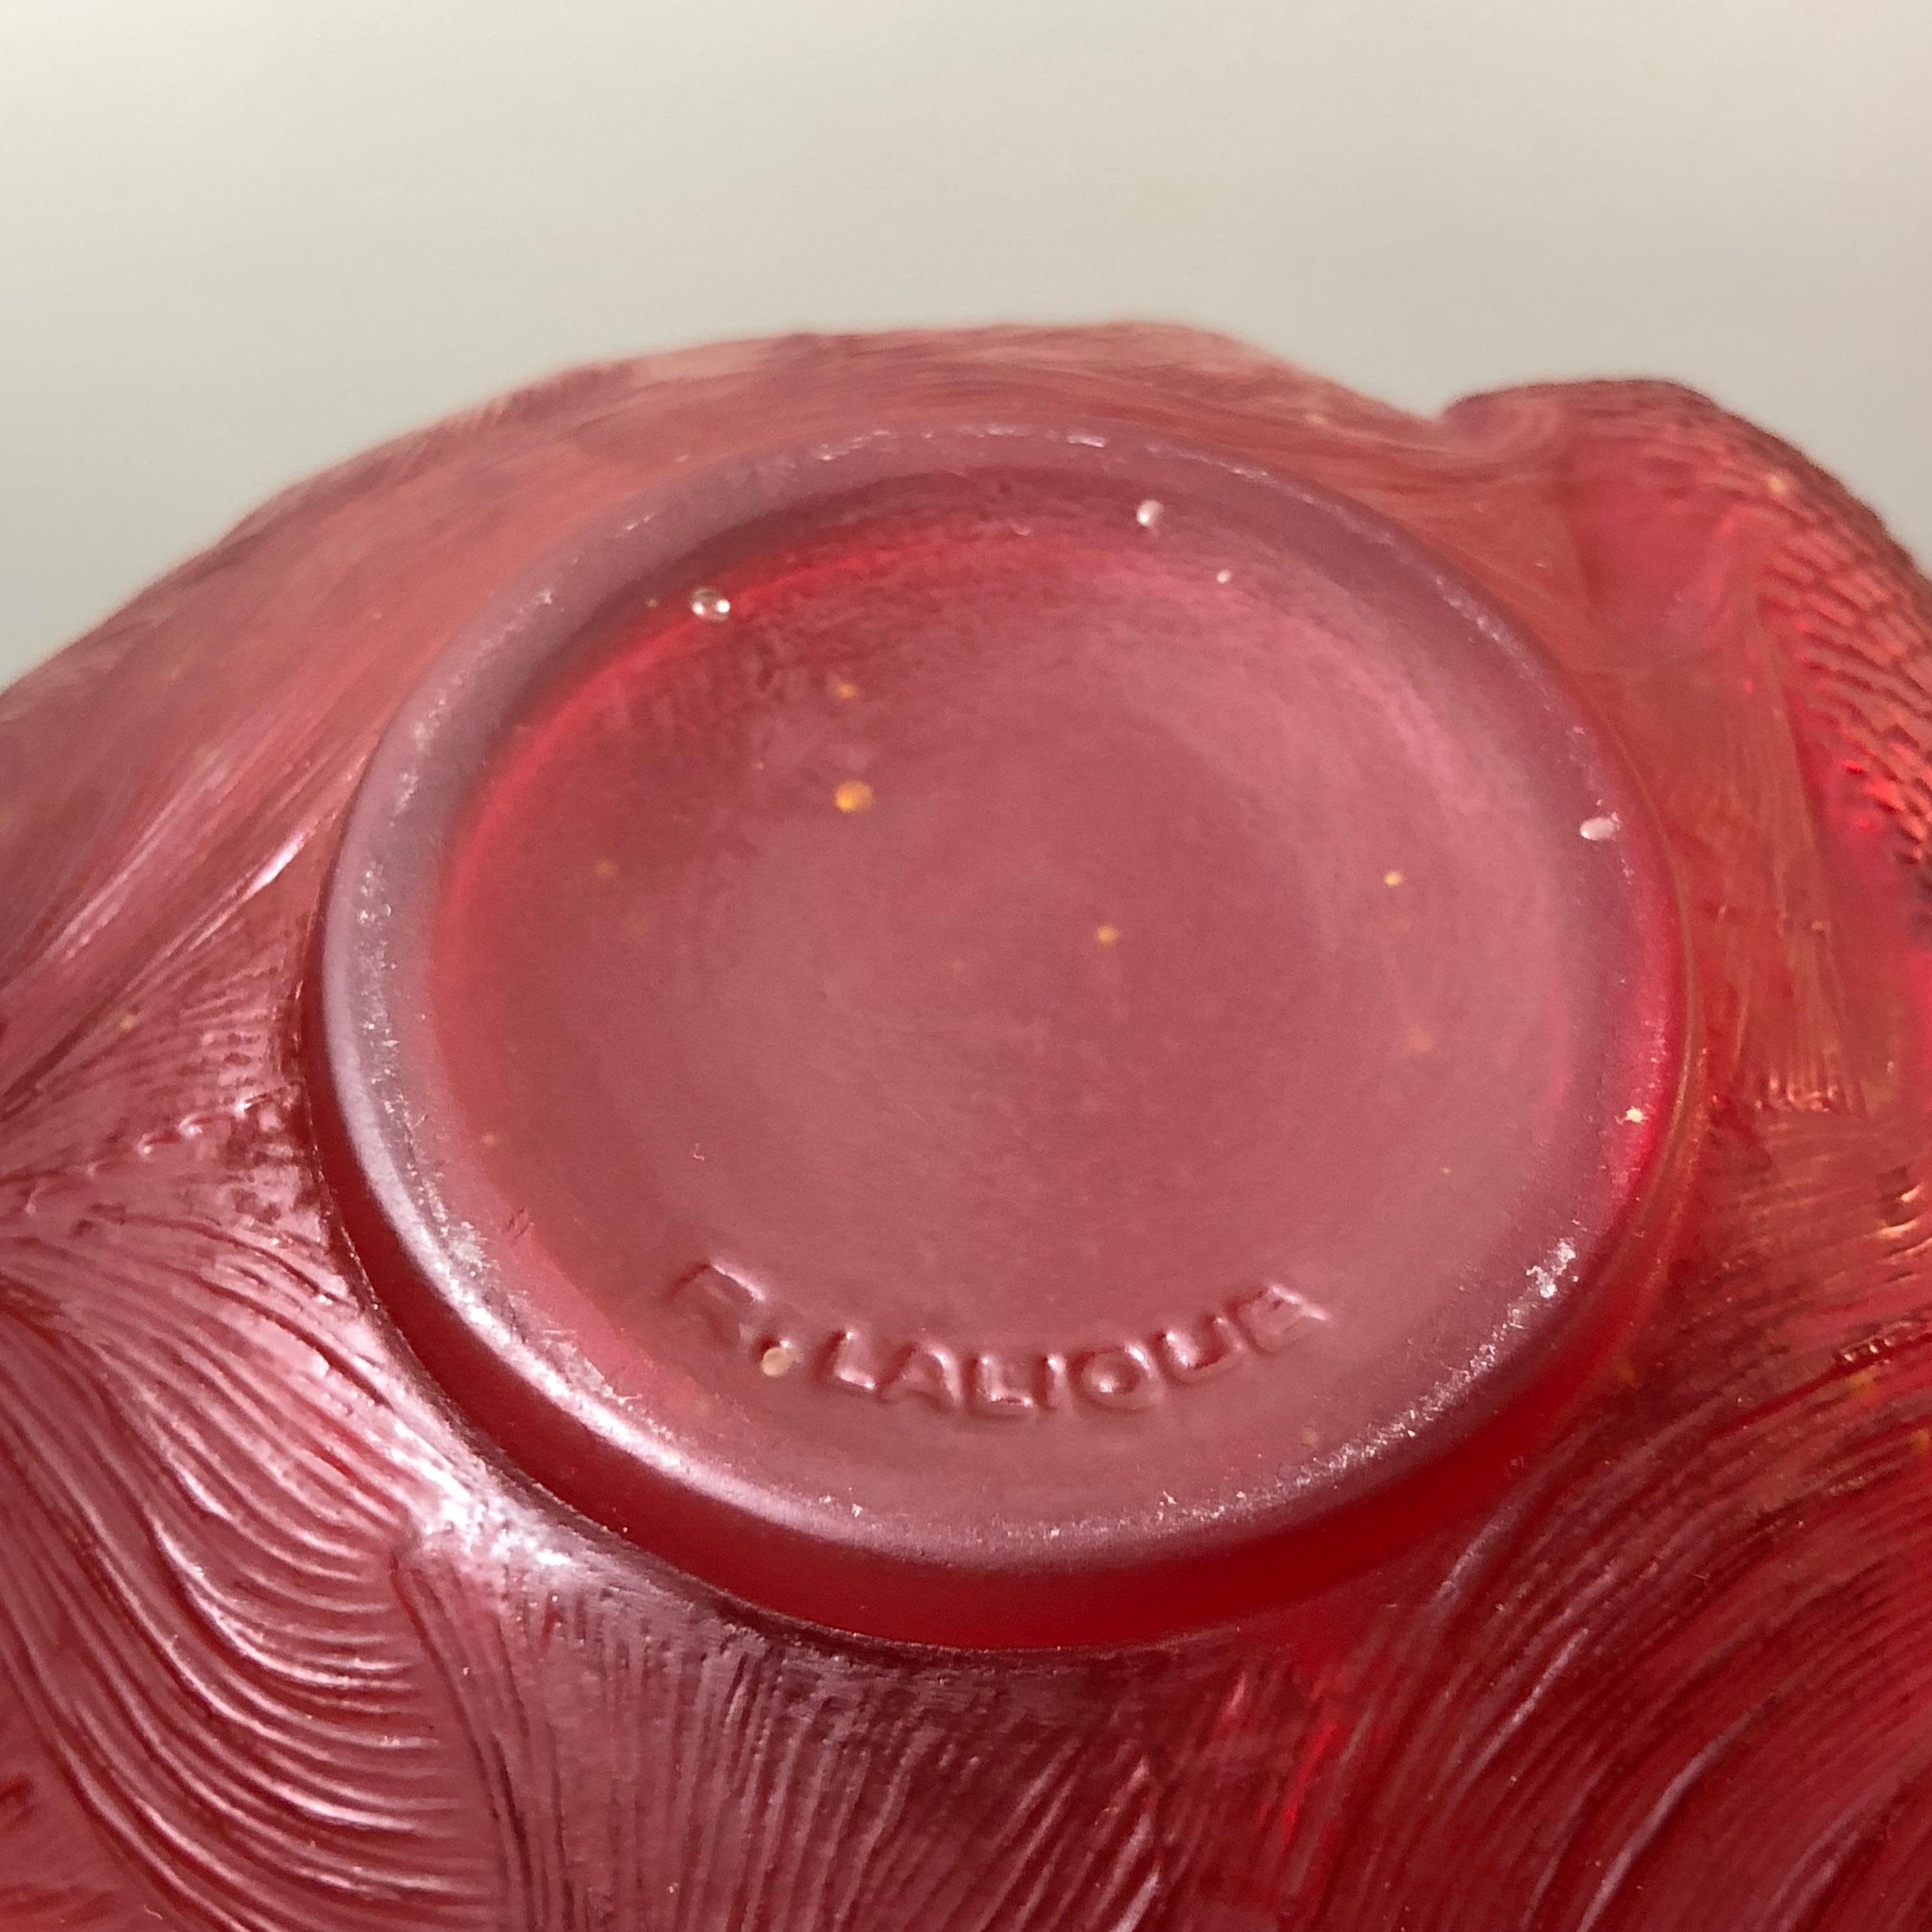 Molded 1924 Rene Lalique Formose Vase in Double Cased Red Tomato Glass, Fishes Design